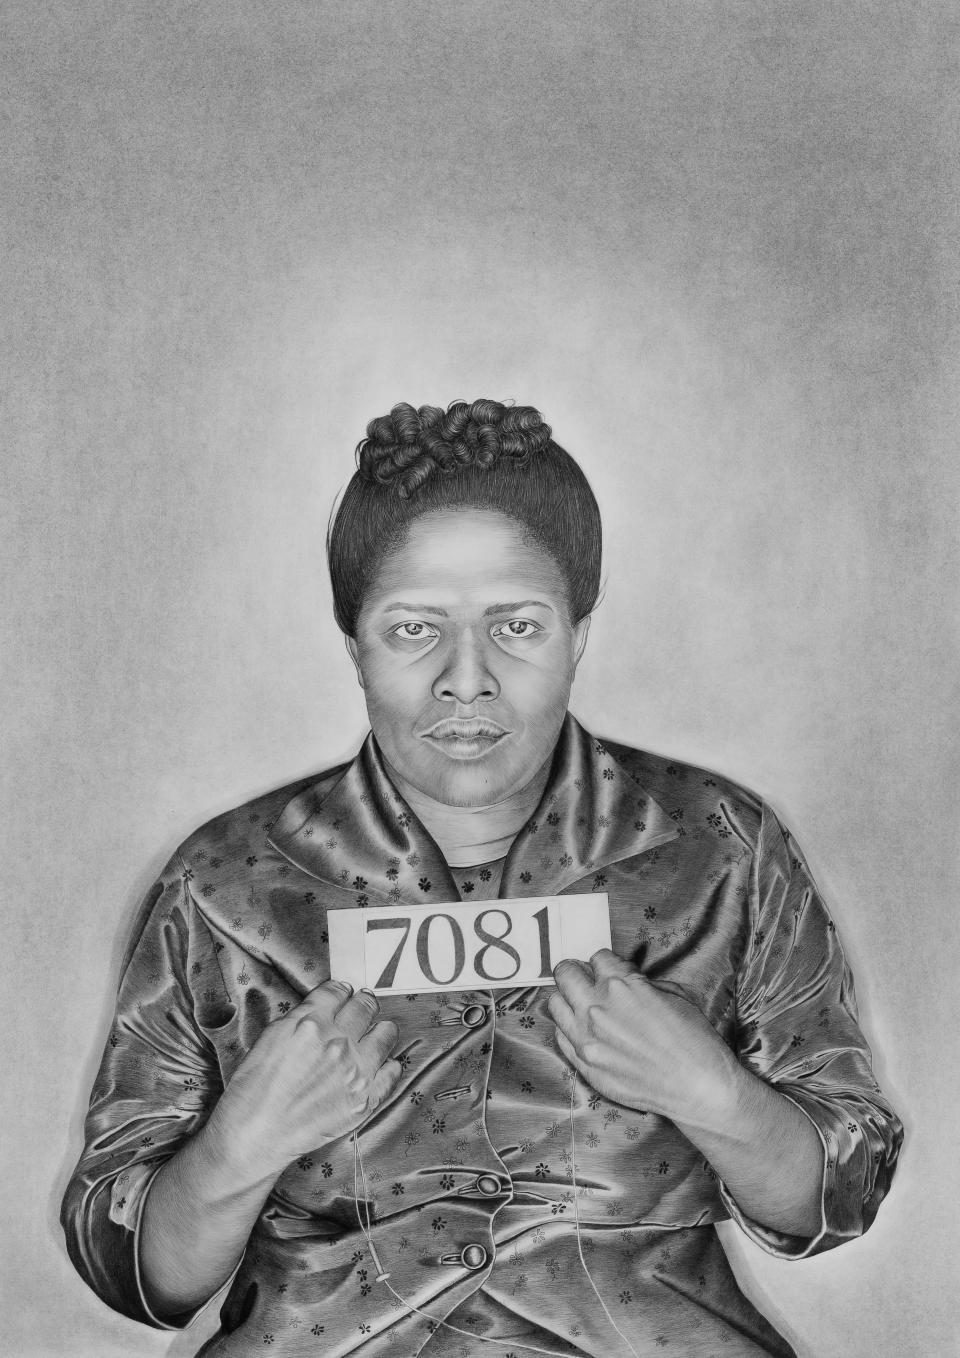 Lava Thomas, Mrs. Lottie Green Varner, 2018, from the series, Mugshot Portraits: Women of the Montgomery Bus Boycott, graphite and Conté pencil on paper, 47 x 33 1/4 inches, Collection of David and Pamela Hornik, Palo Alto, California.